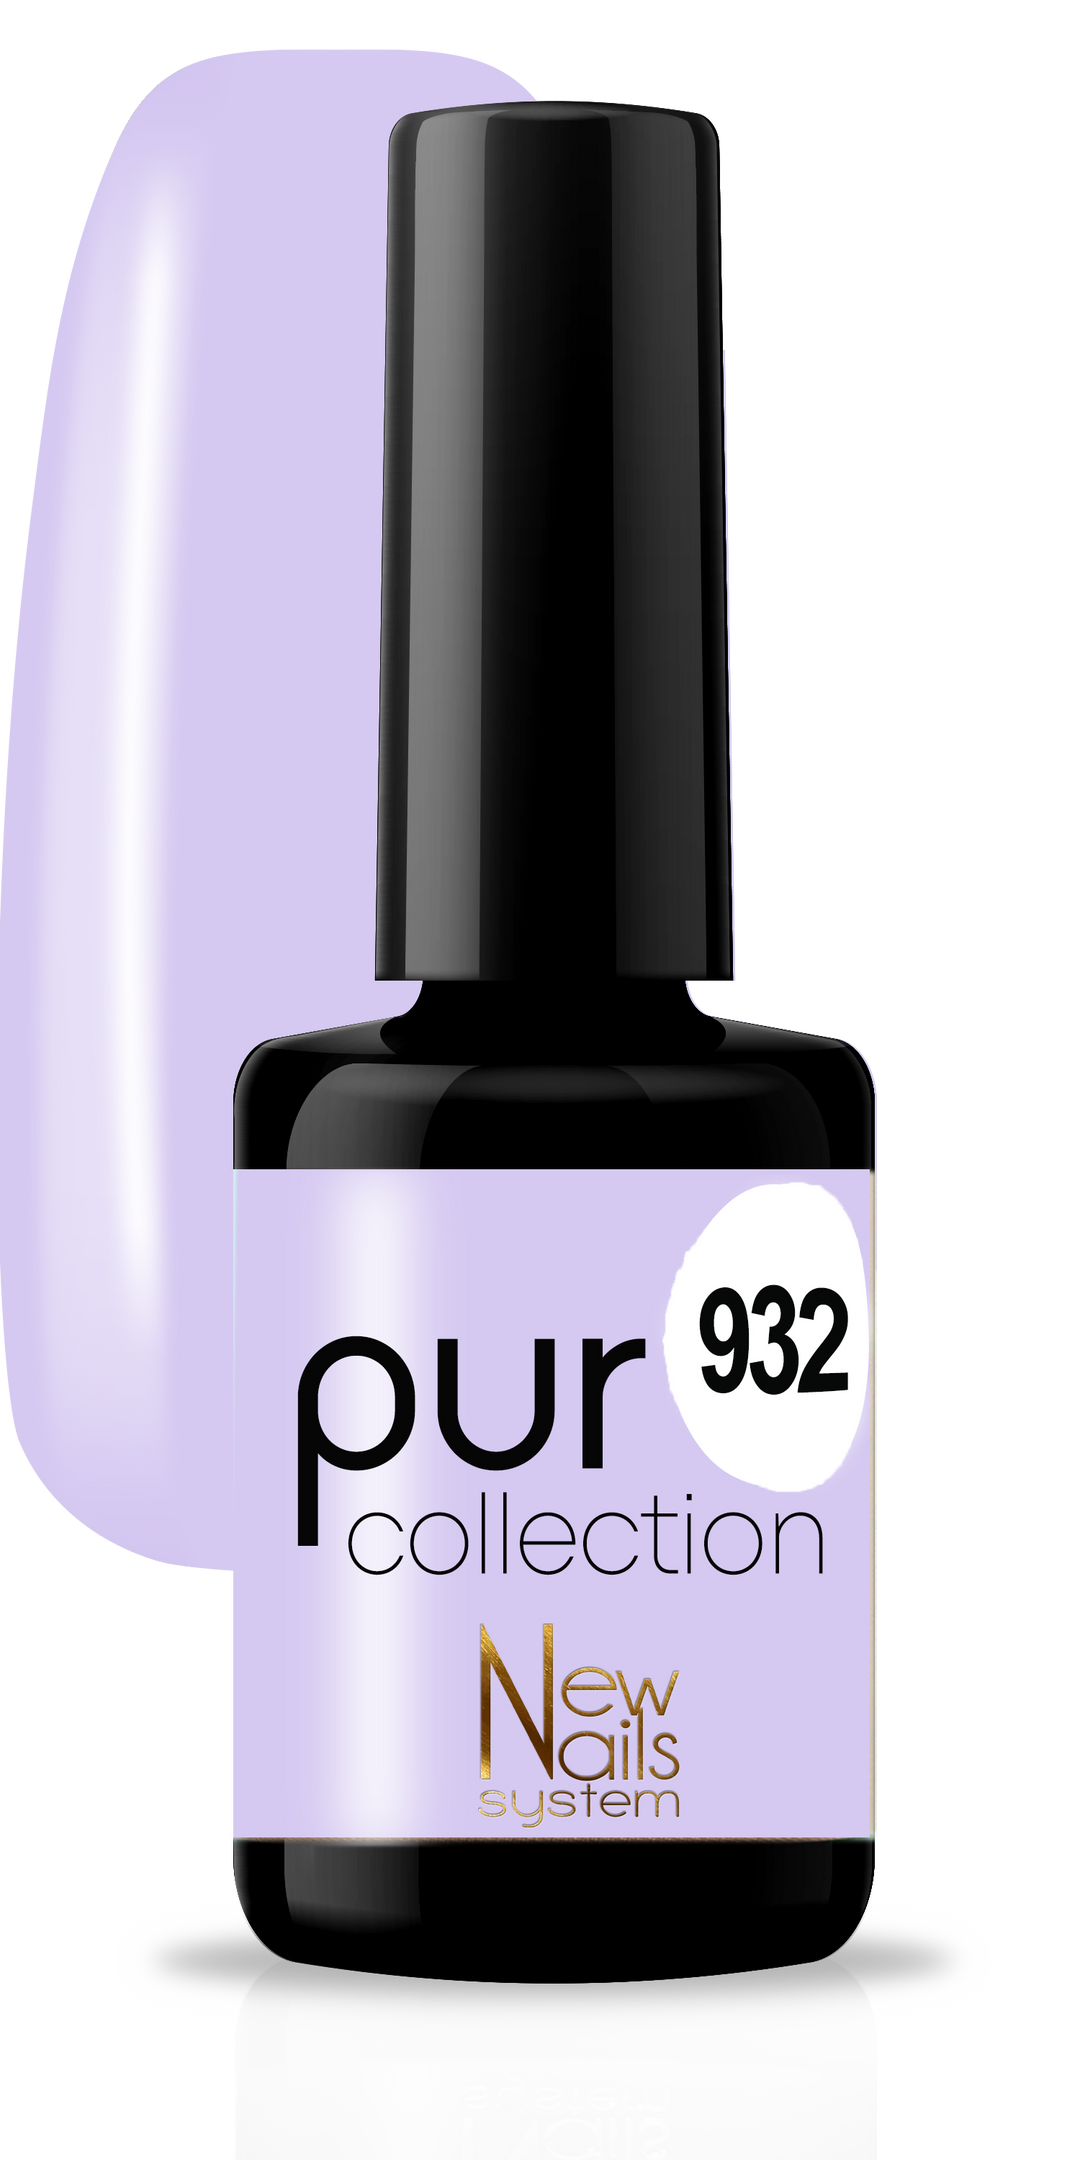 Puro collection 932 color Sweet Pastel semi-permanent 5ml